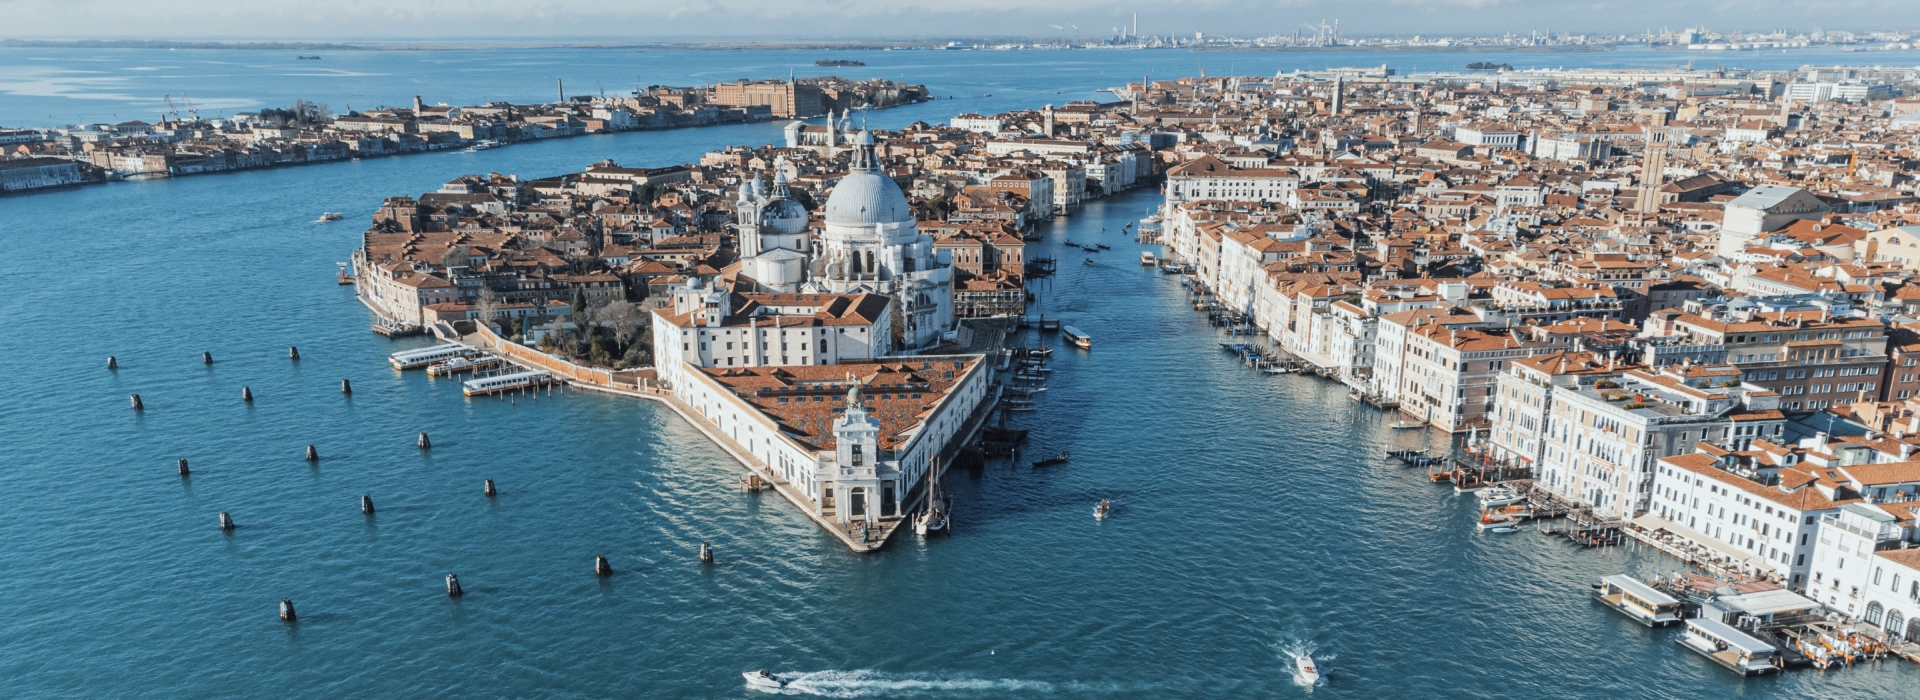 Venice Residents Demand More Action from City Officials to Curb Tourist Influx